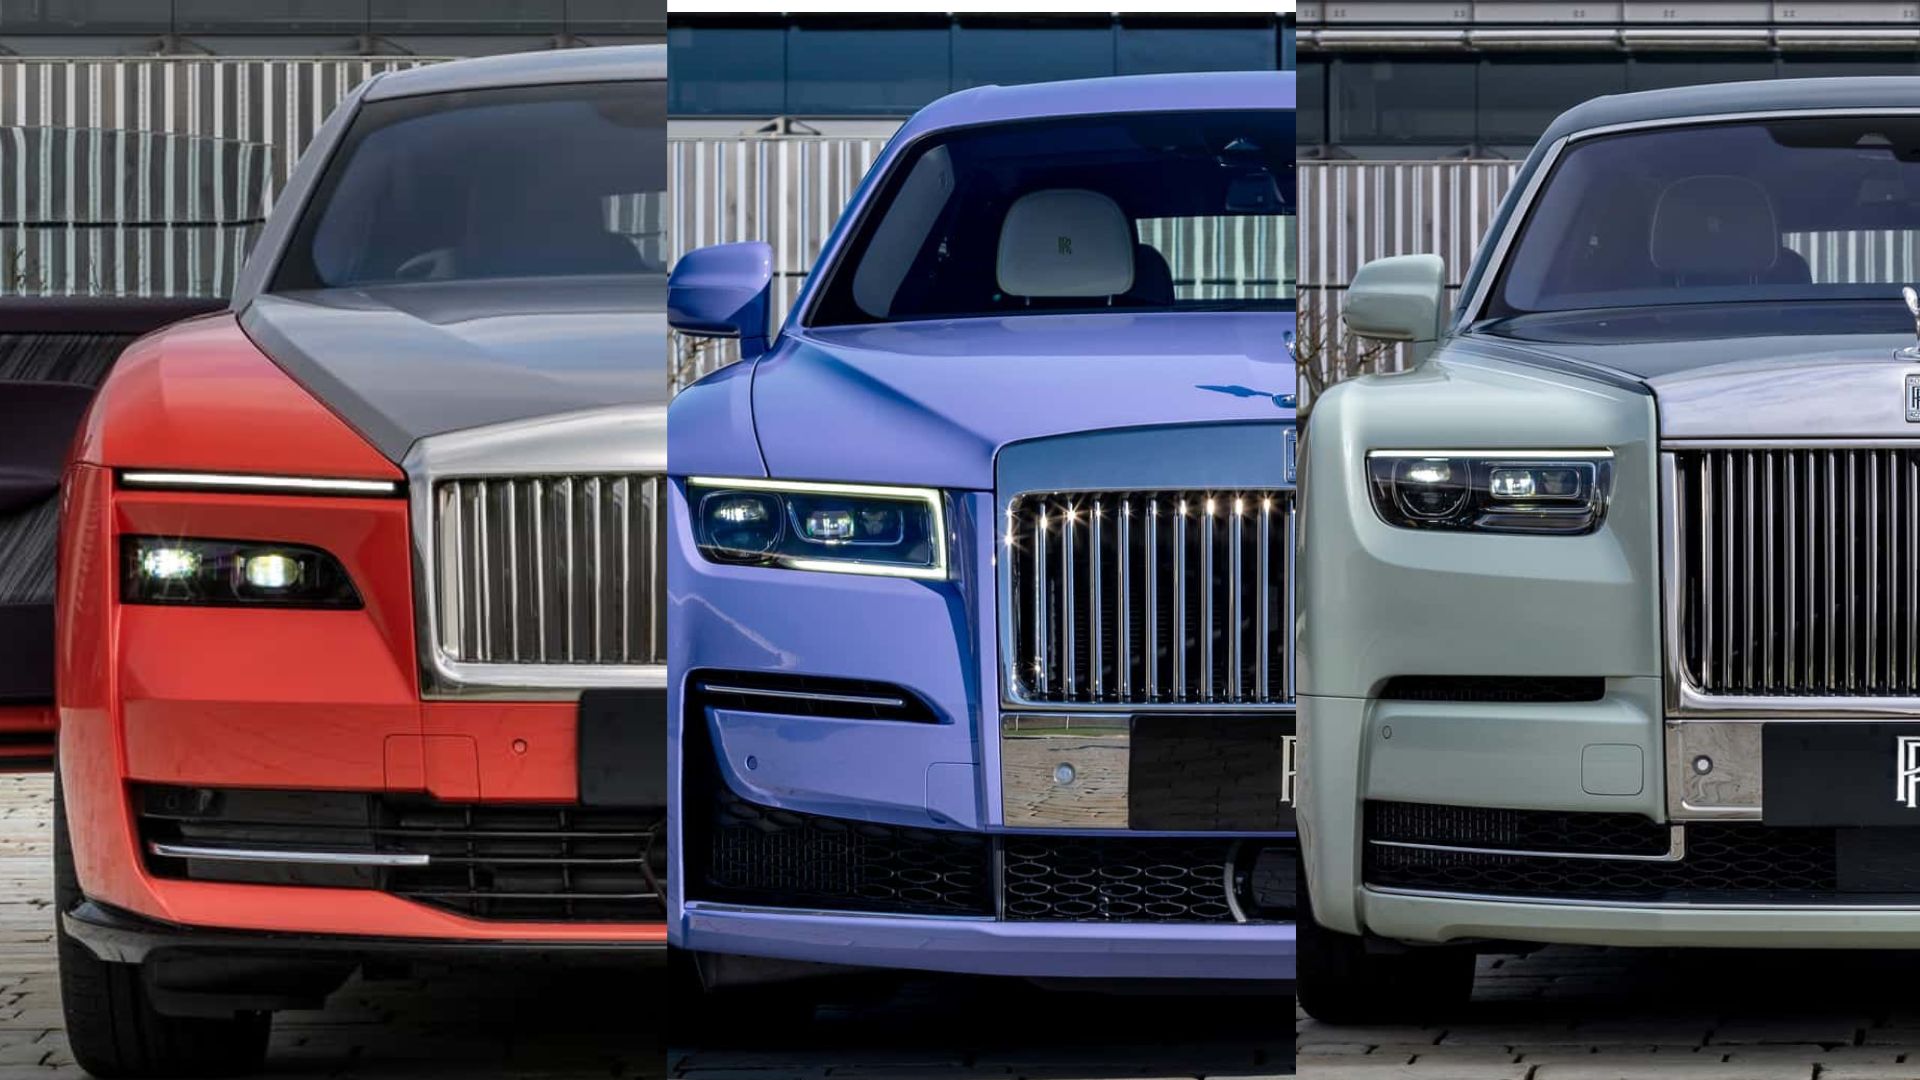 Rolls-Royce Introduces Three Special Cars for China, Including 'Phantom Extended 'Magnetism'